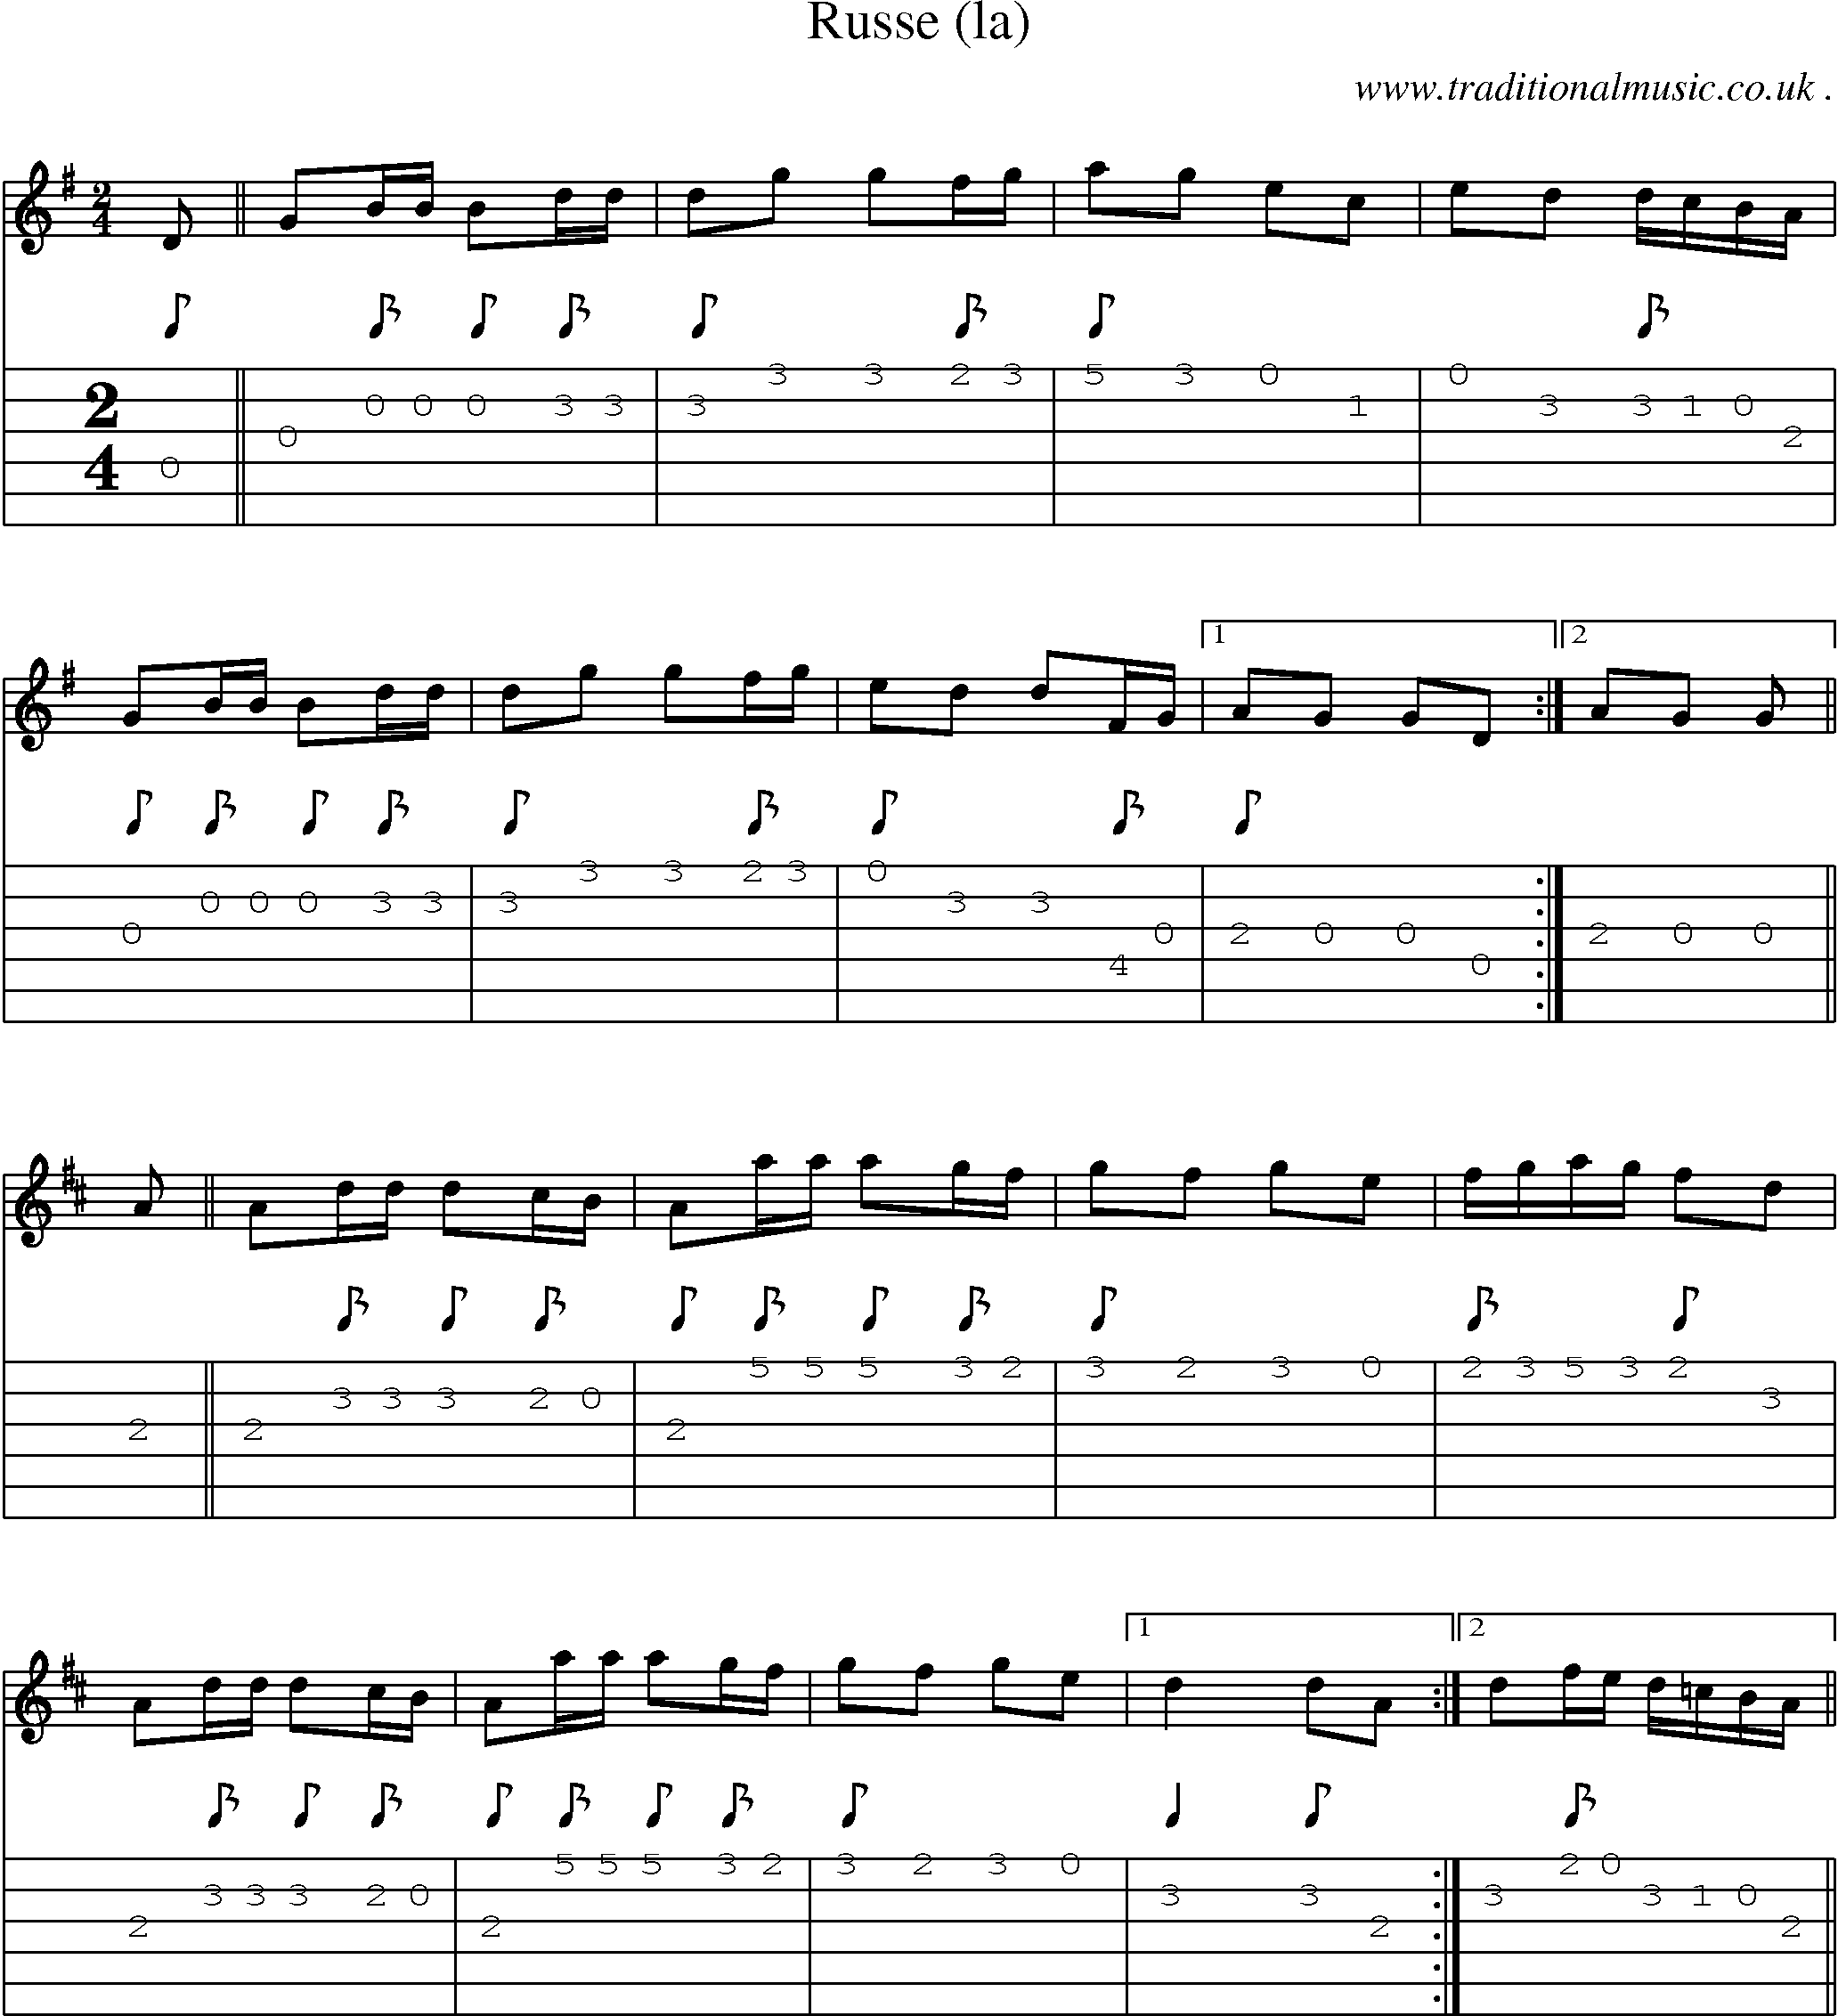 Sheet-Music and Guitar Tabs for Russe (la)